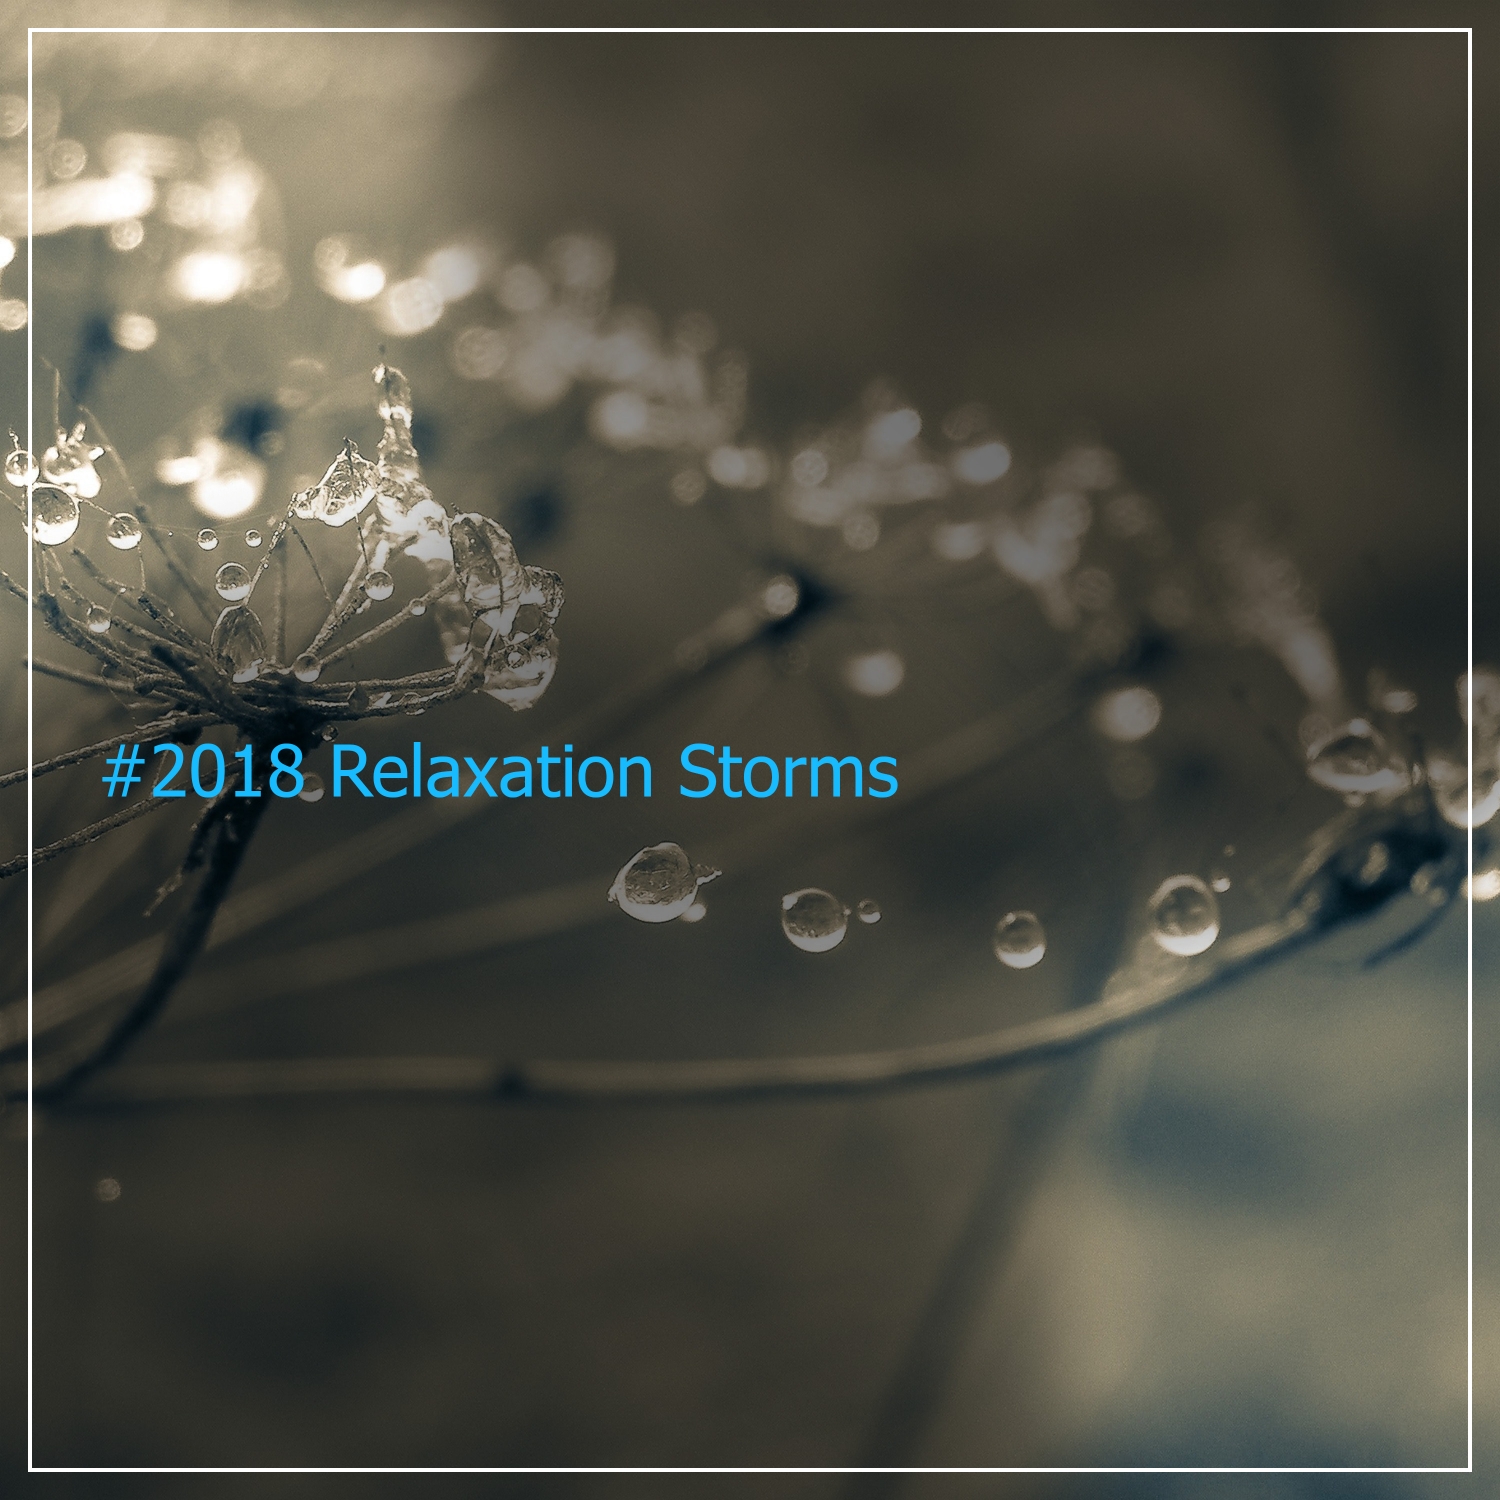 #2018 Relaxation Storms